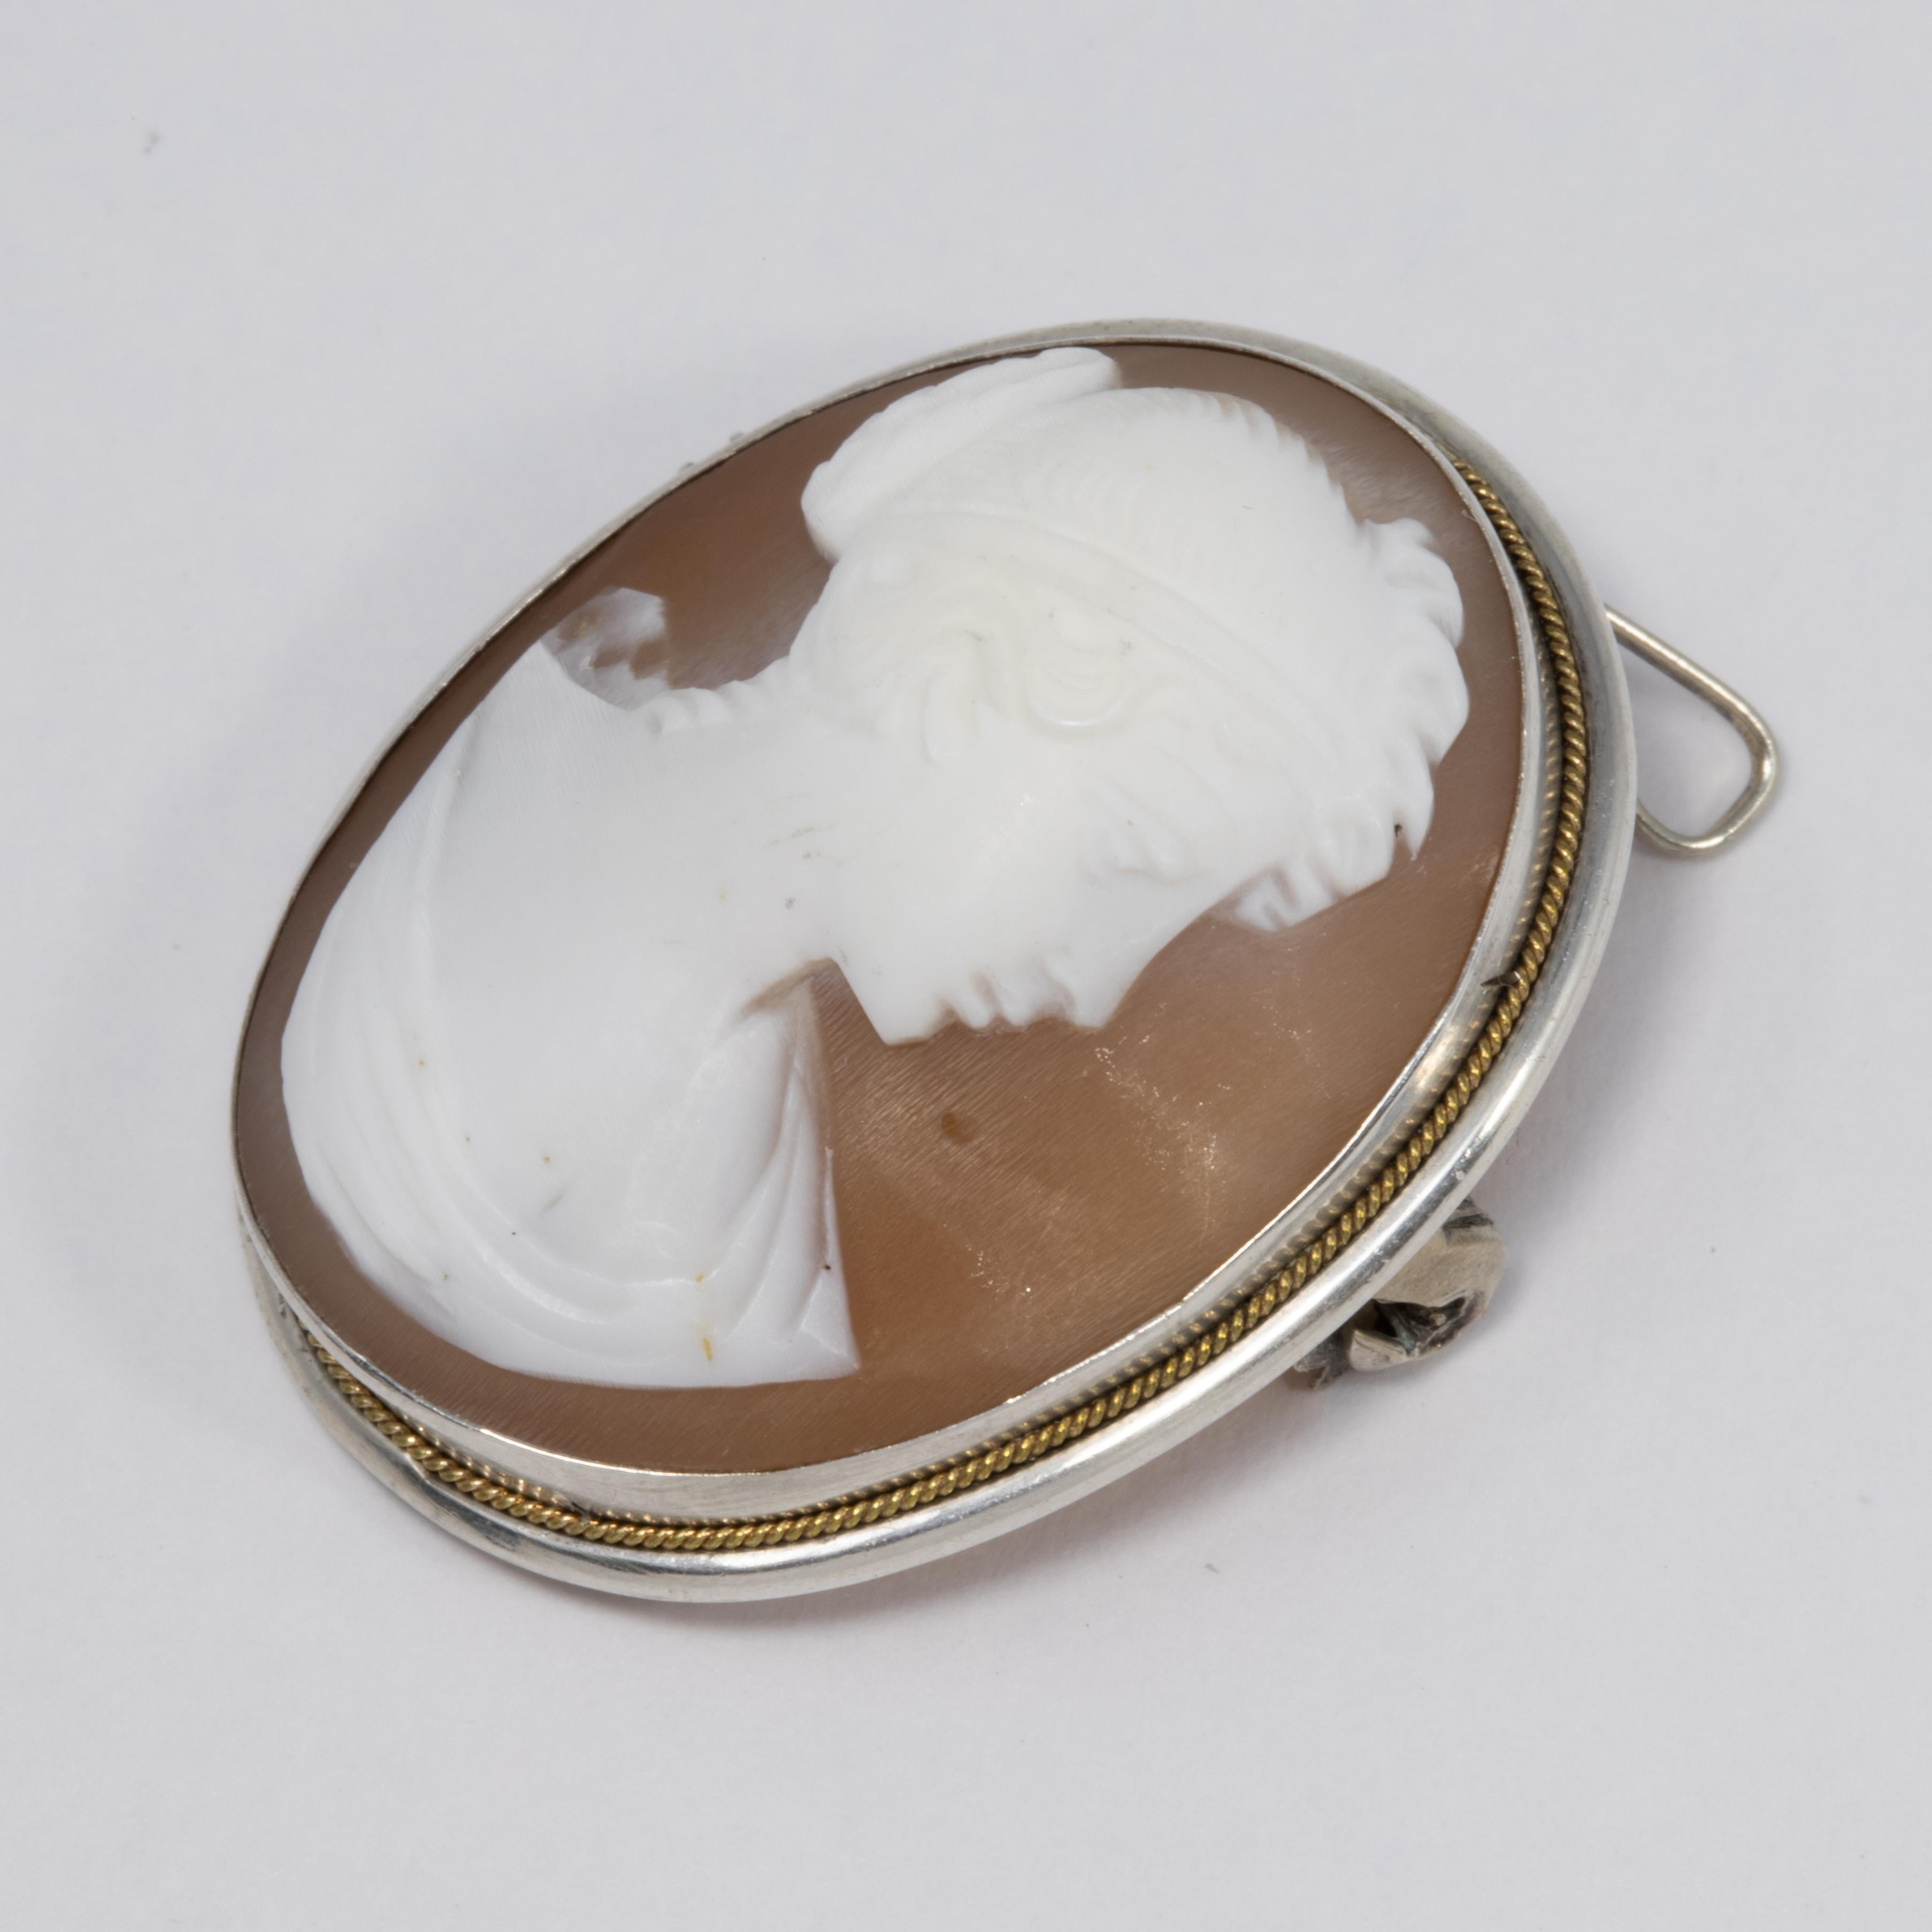 An exquisite cameo pin/brooch/pendant accessory. Features a two-tone cameo with a Victorian female figure, set in a sterling silver, open back bezel.

Unidentified hallmark on the pin stem.